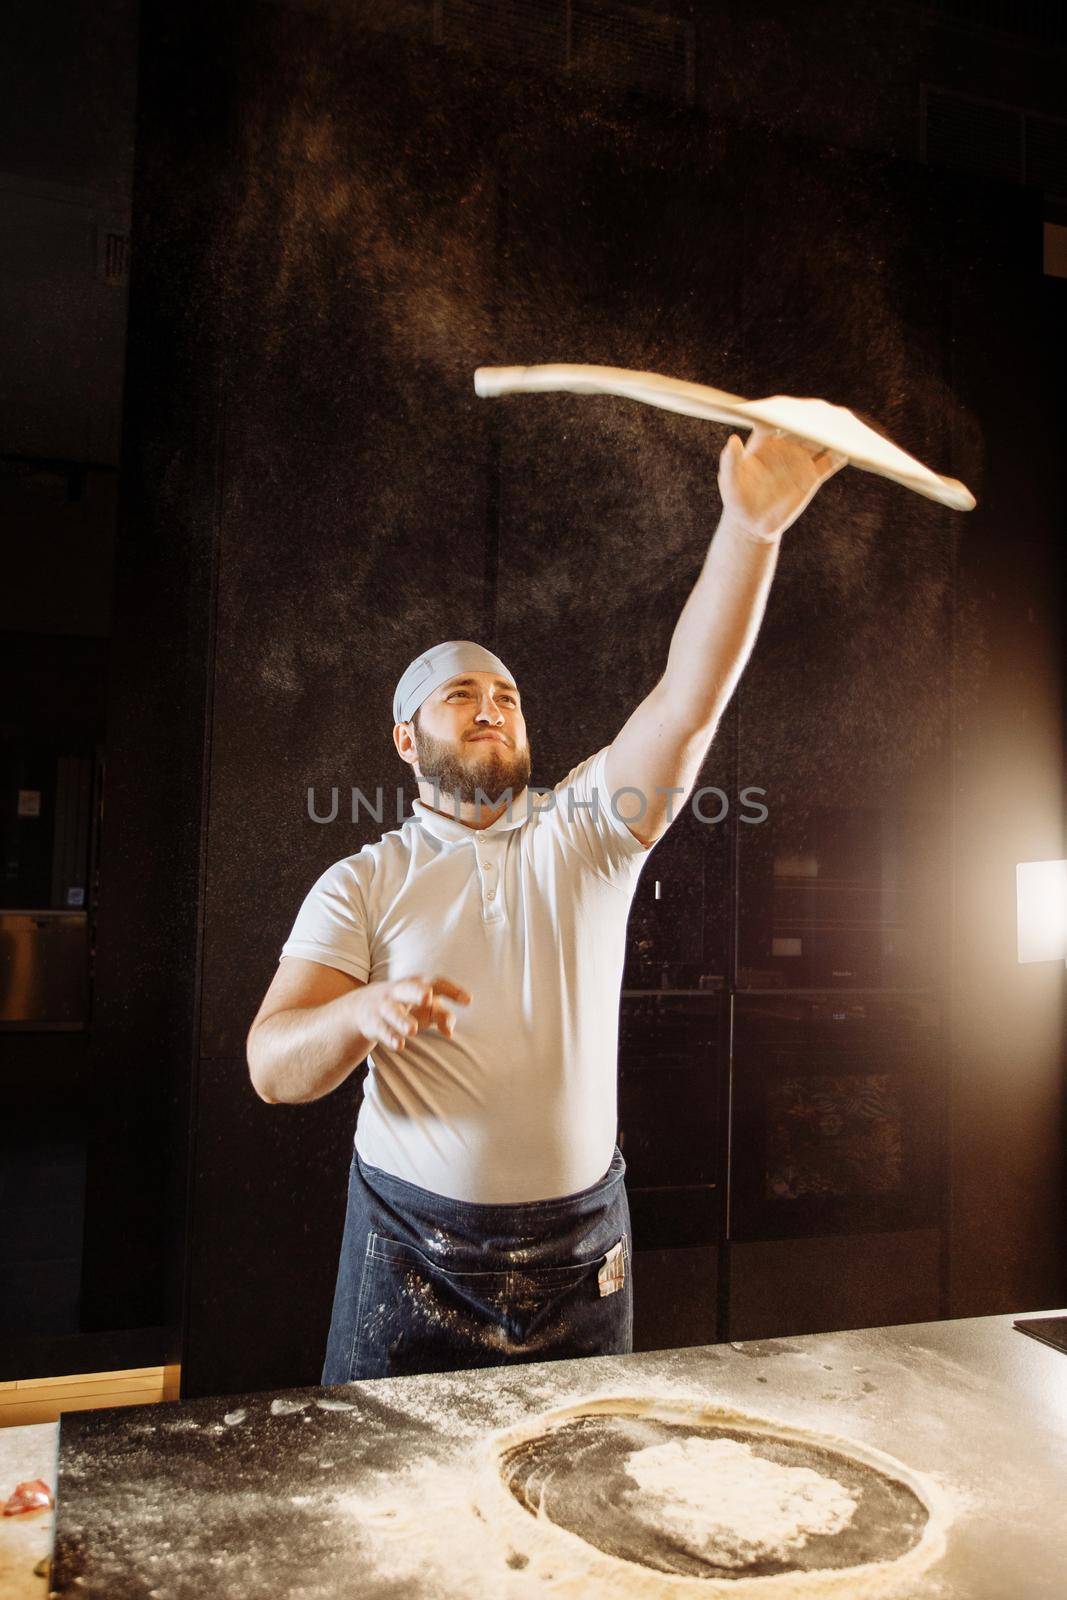 Skilled chef throwing up pizza base dough by Gravika